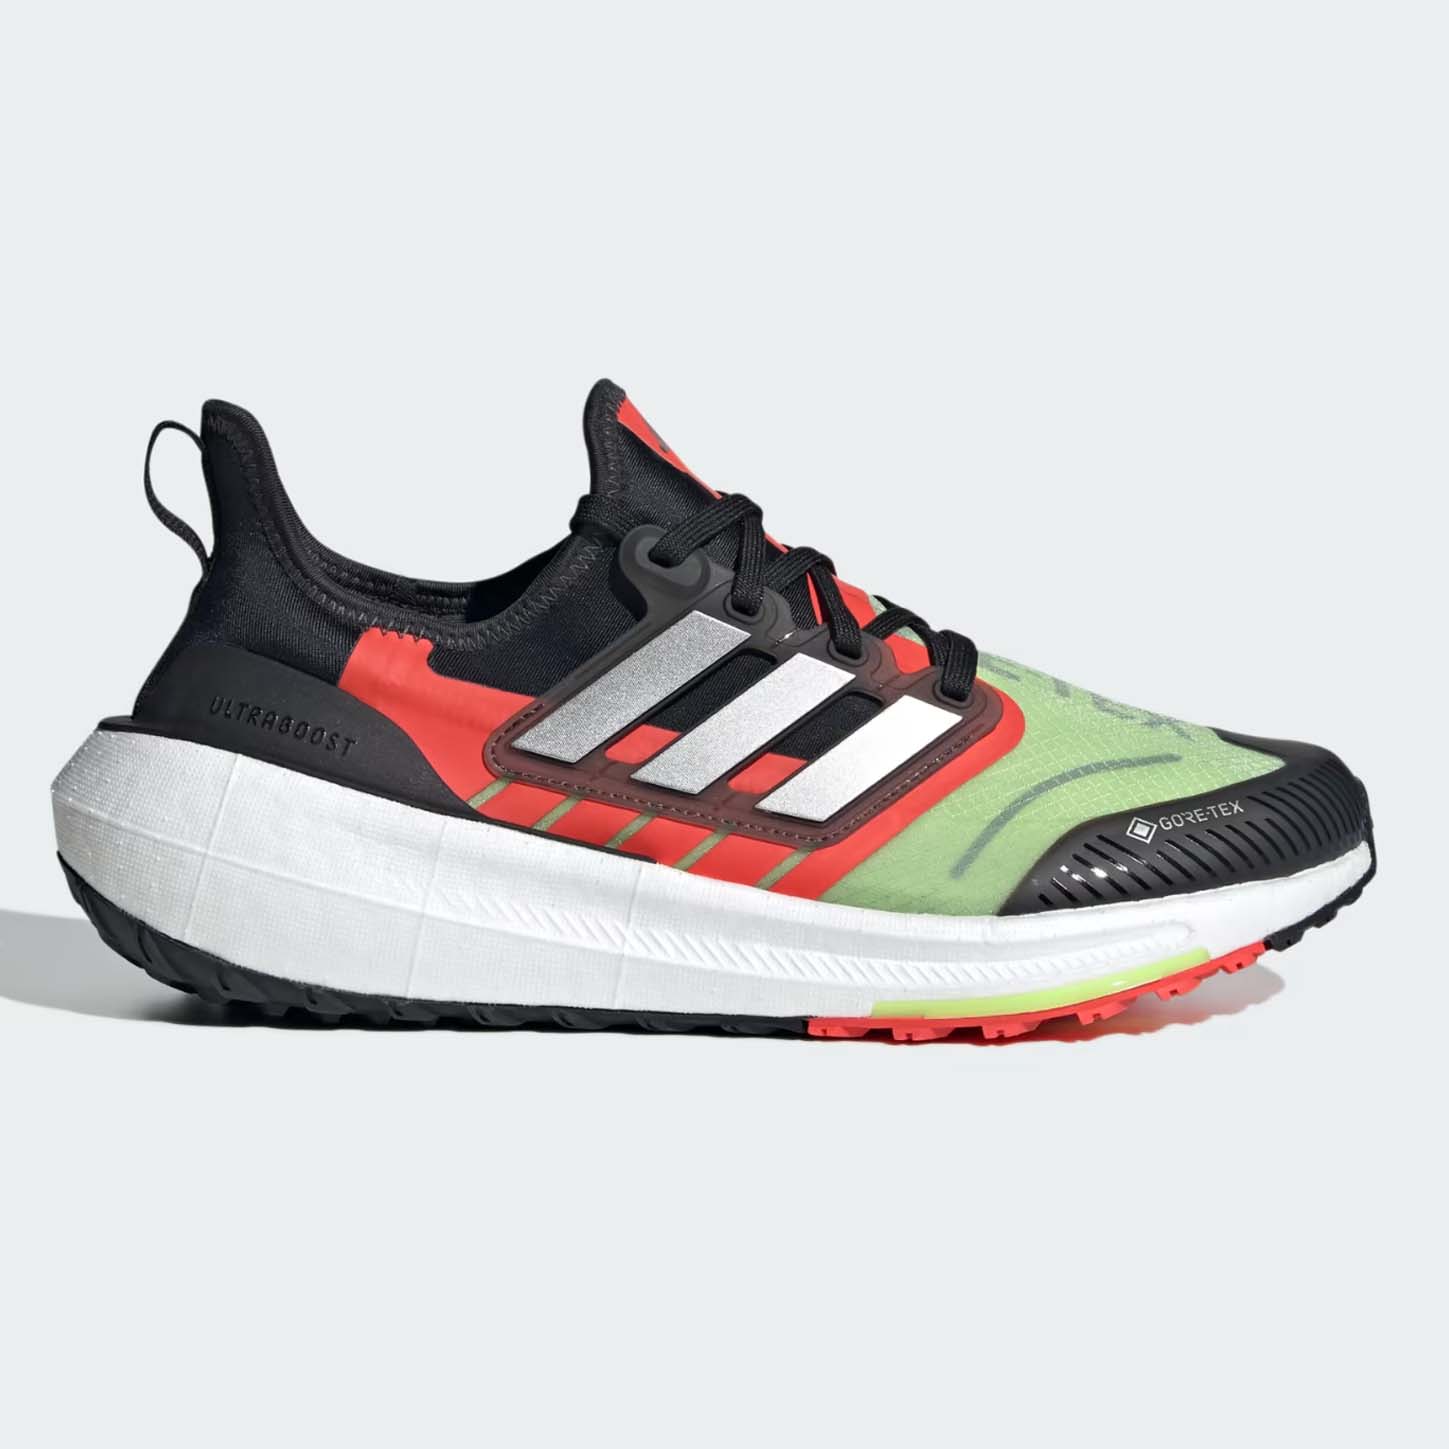 Multi-colored adidas ULTRABOOST Light Gore-Tex Running Shoes